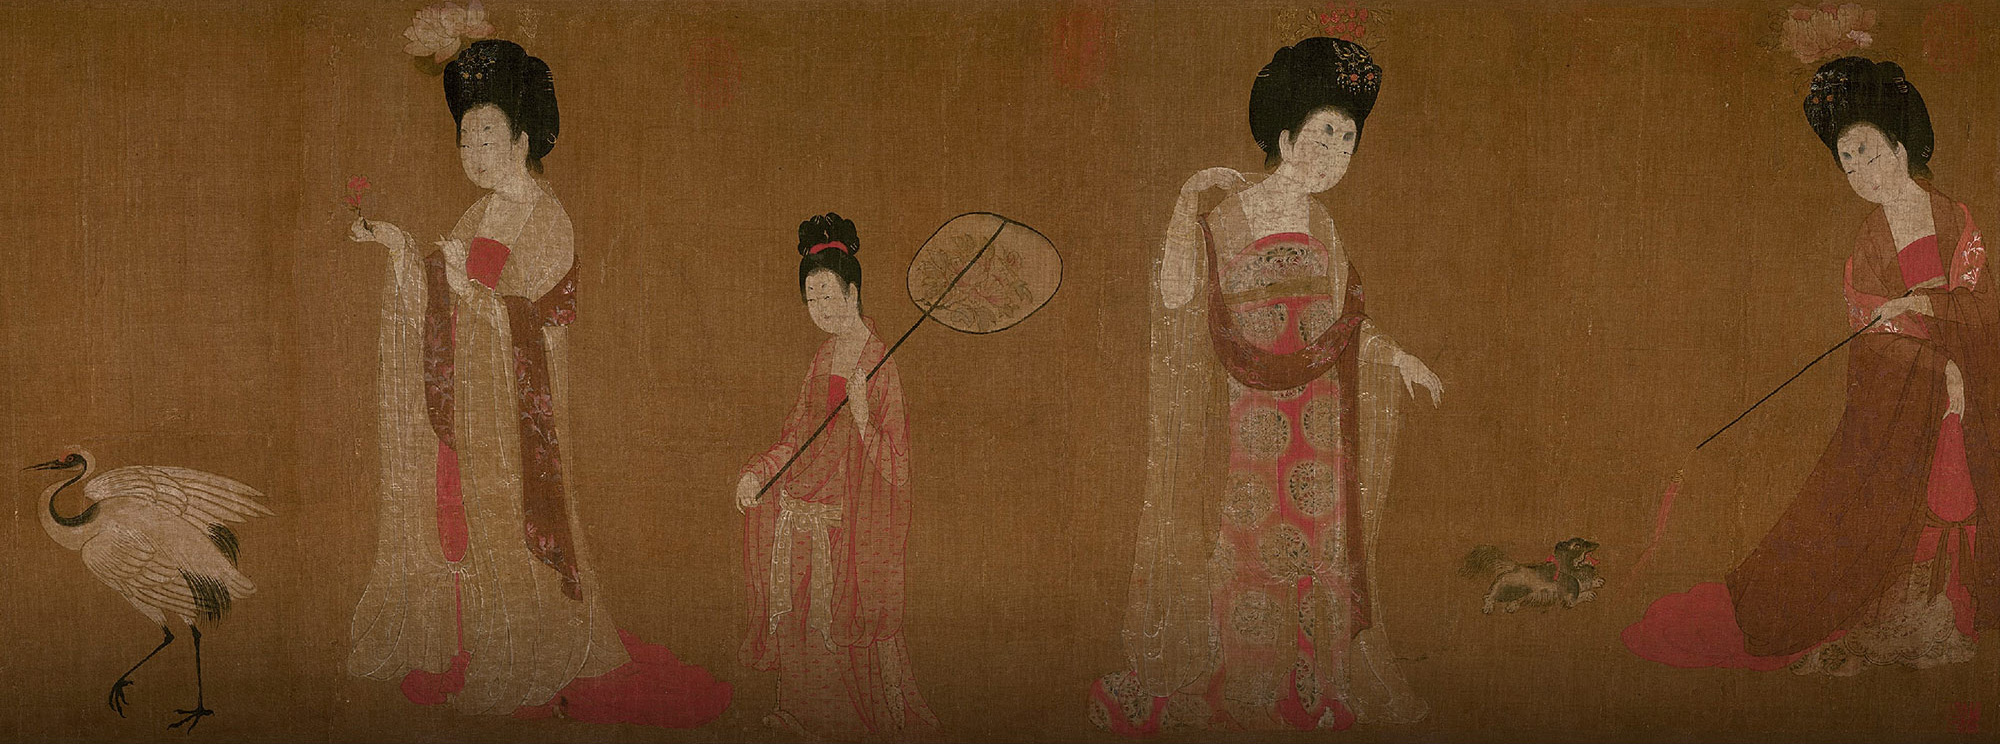 Court Ladies Adorning Their Hair with Flowers, Zhou Fang (late 8th-early 9th century A.D.)